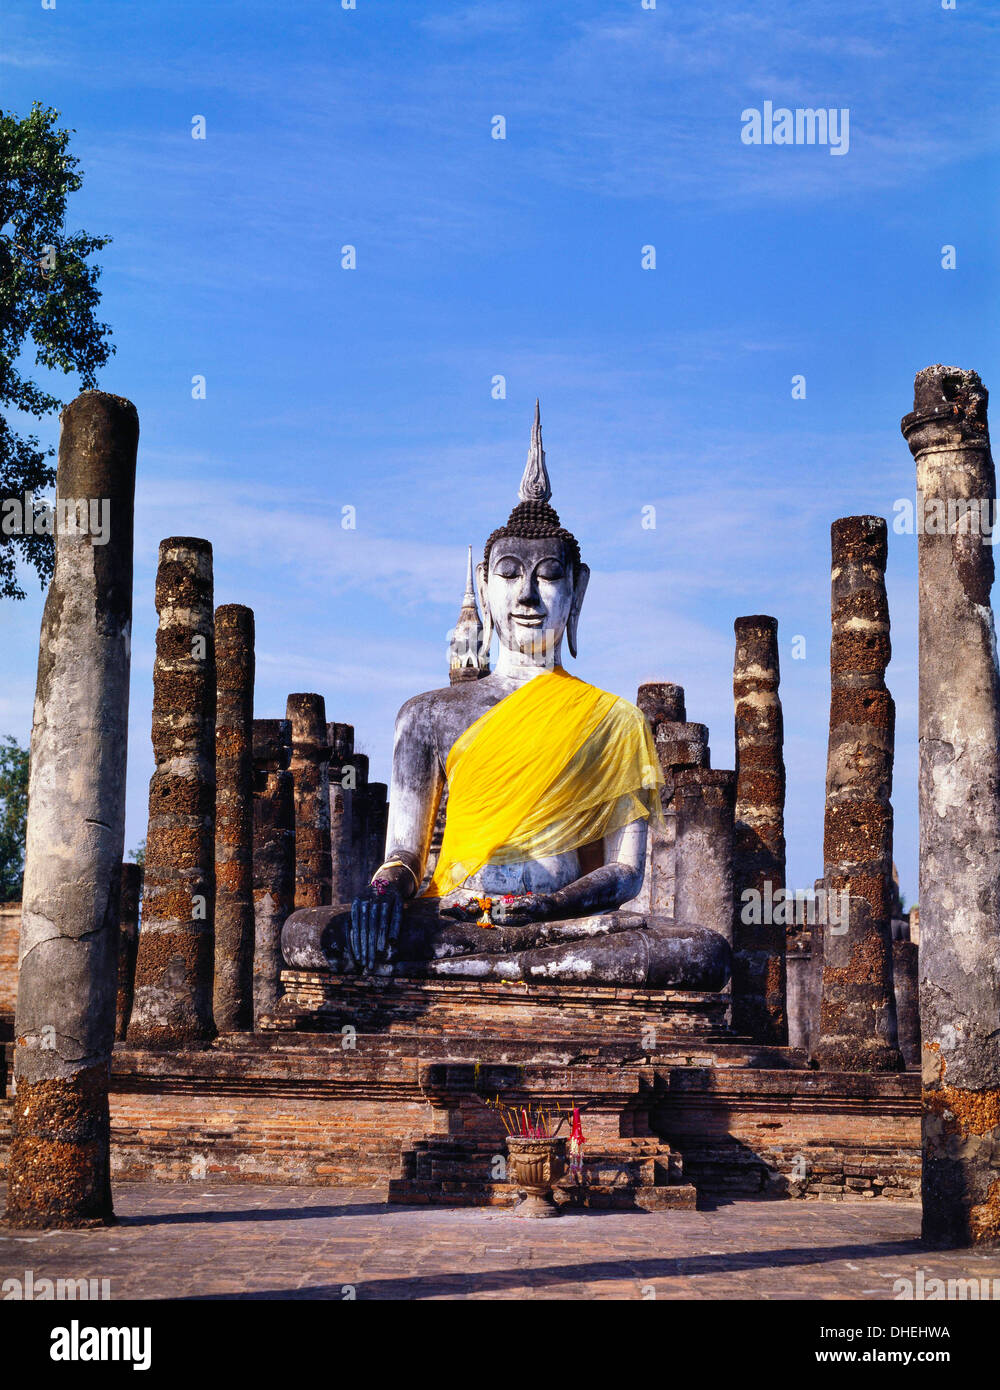 Statue of the Buddha With Religious Offerings, Wat Mahathat, Sukothai, Thailand Stock Photo